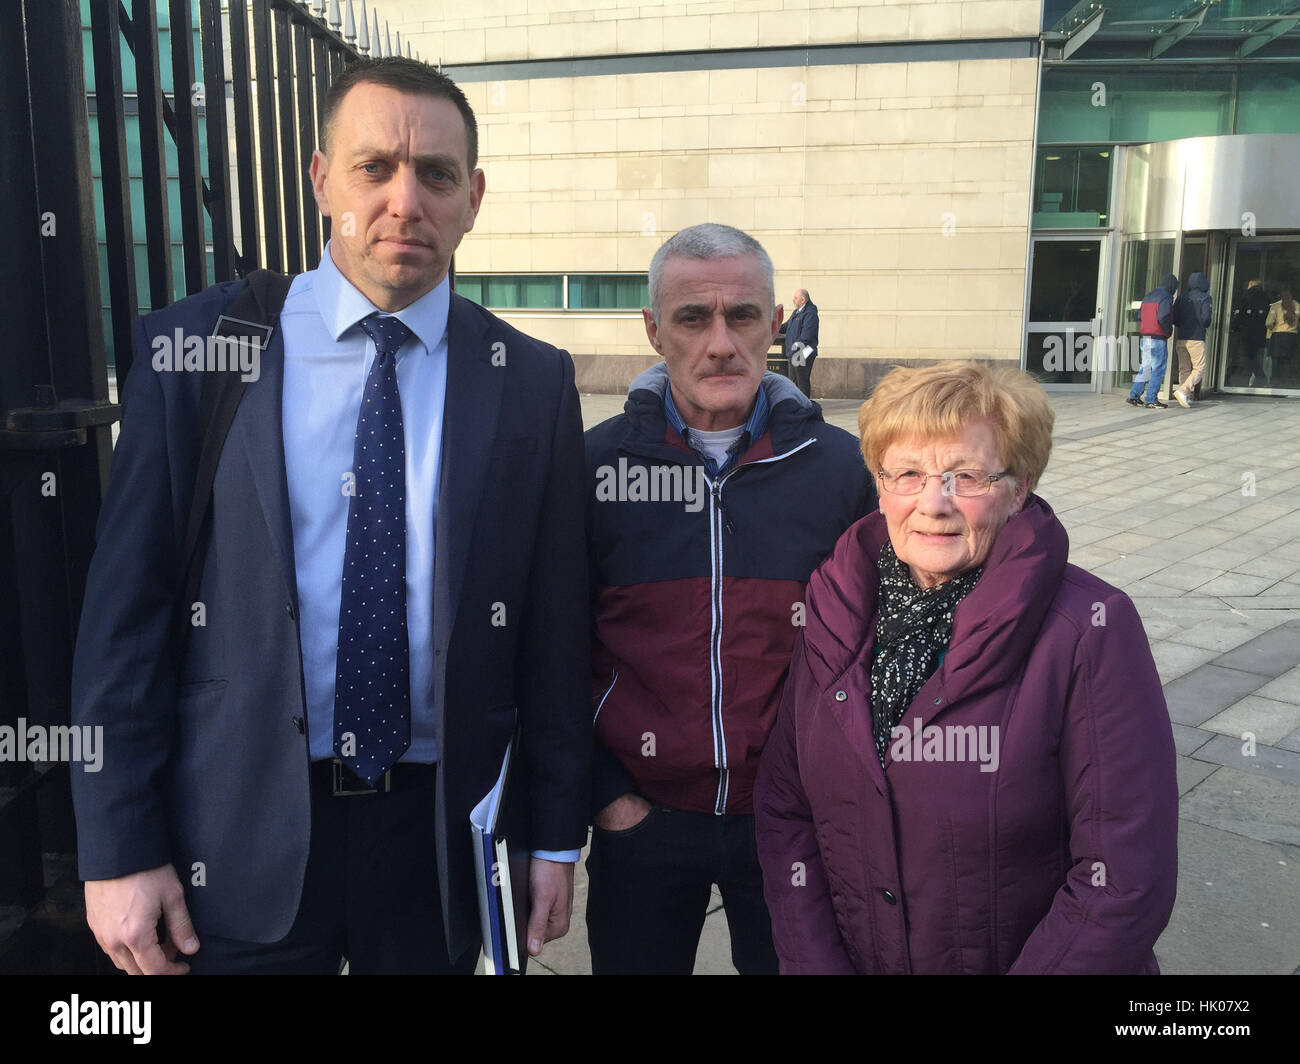 (Left to right) Family solicitor Padraig O Muirigh with Henry Thornton's son Damien and widow Mary outside Belfast Coroner's court, where a coroner has named a British soldier who shot dead father of six Henry Thornton outside a Belfast police station after mistaking a van backfiring for a gun attack. Stock Photo